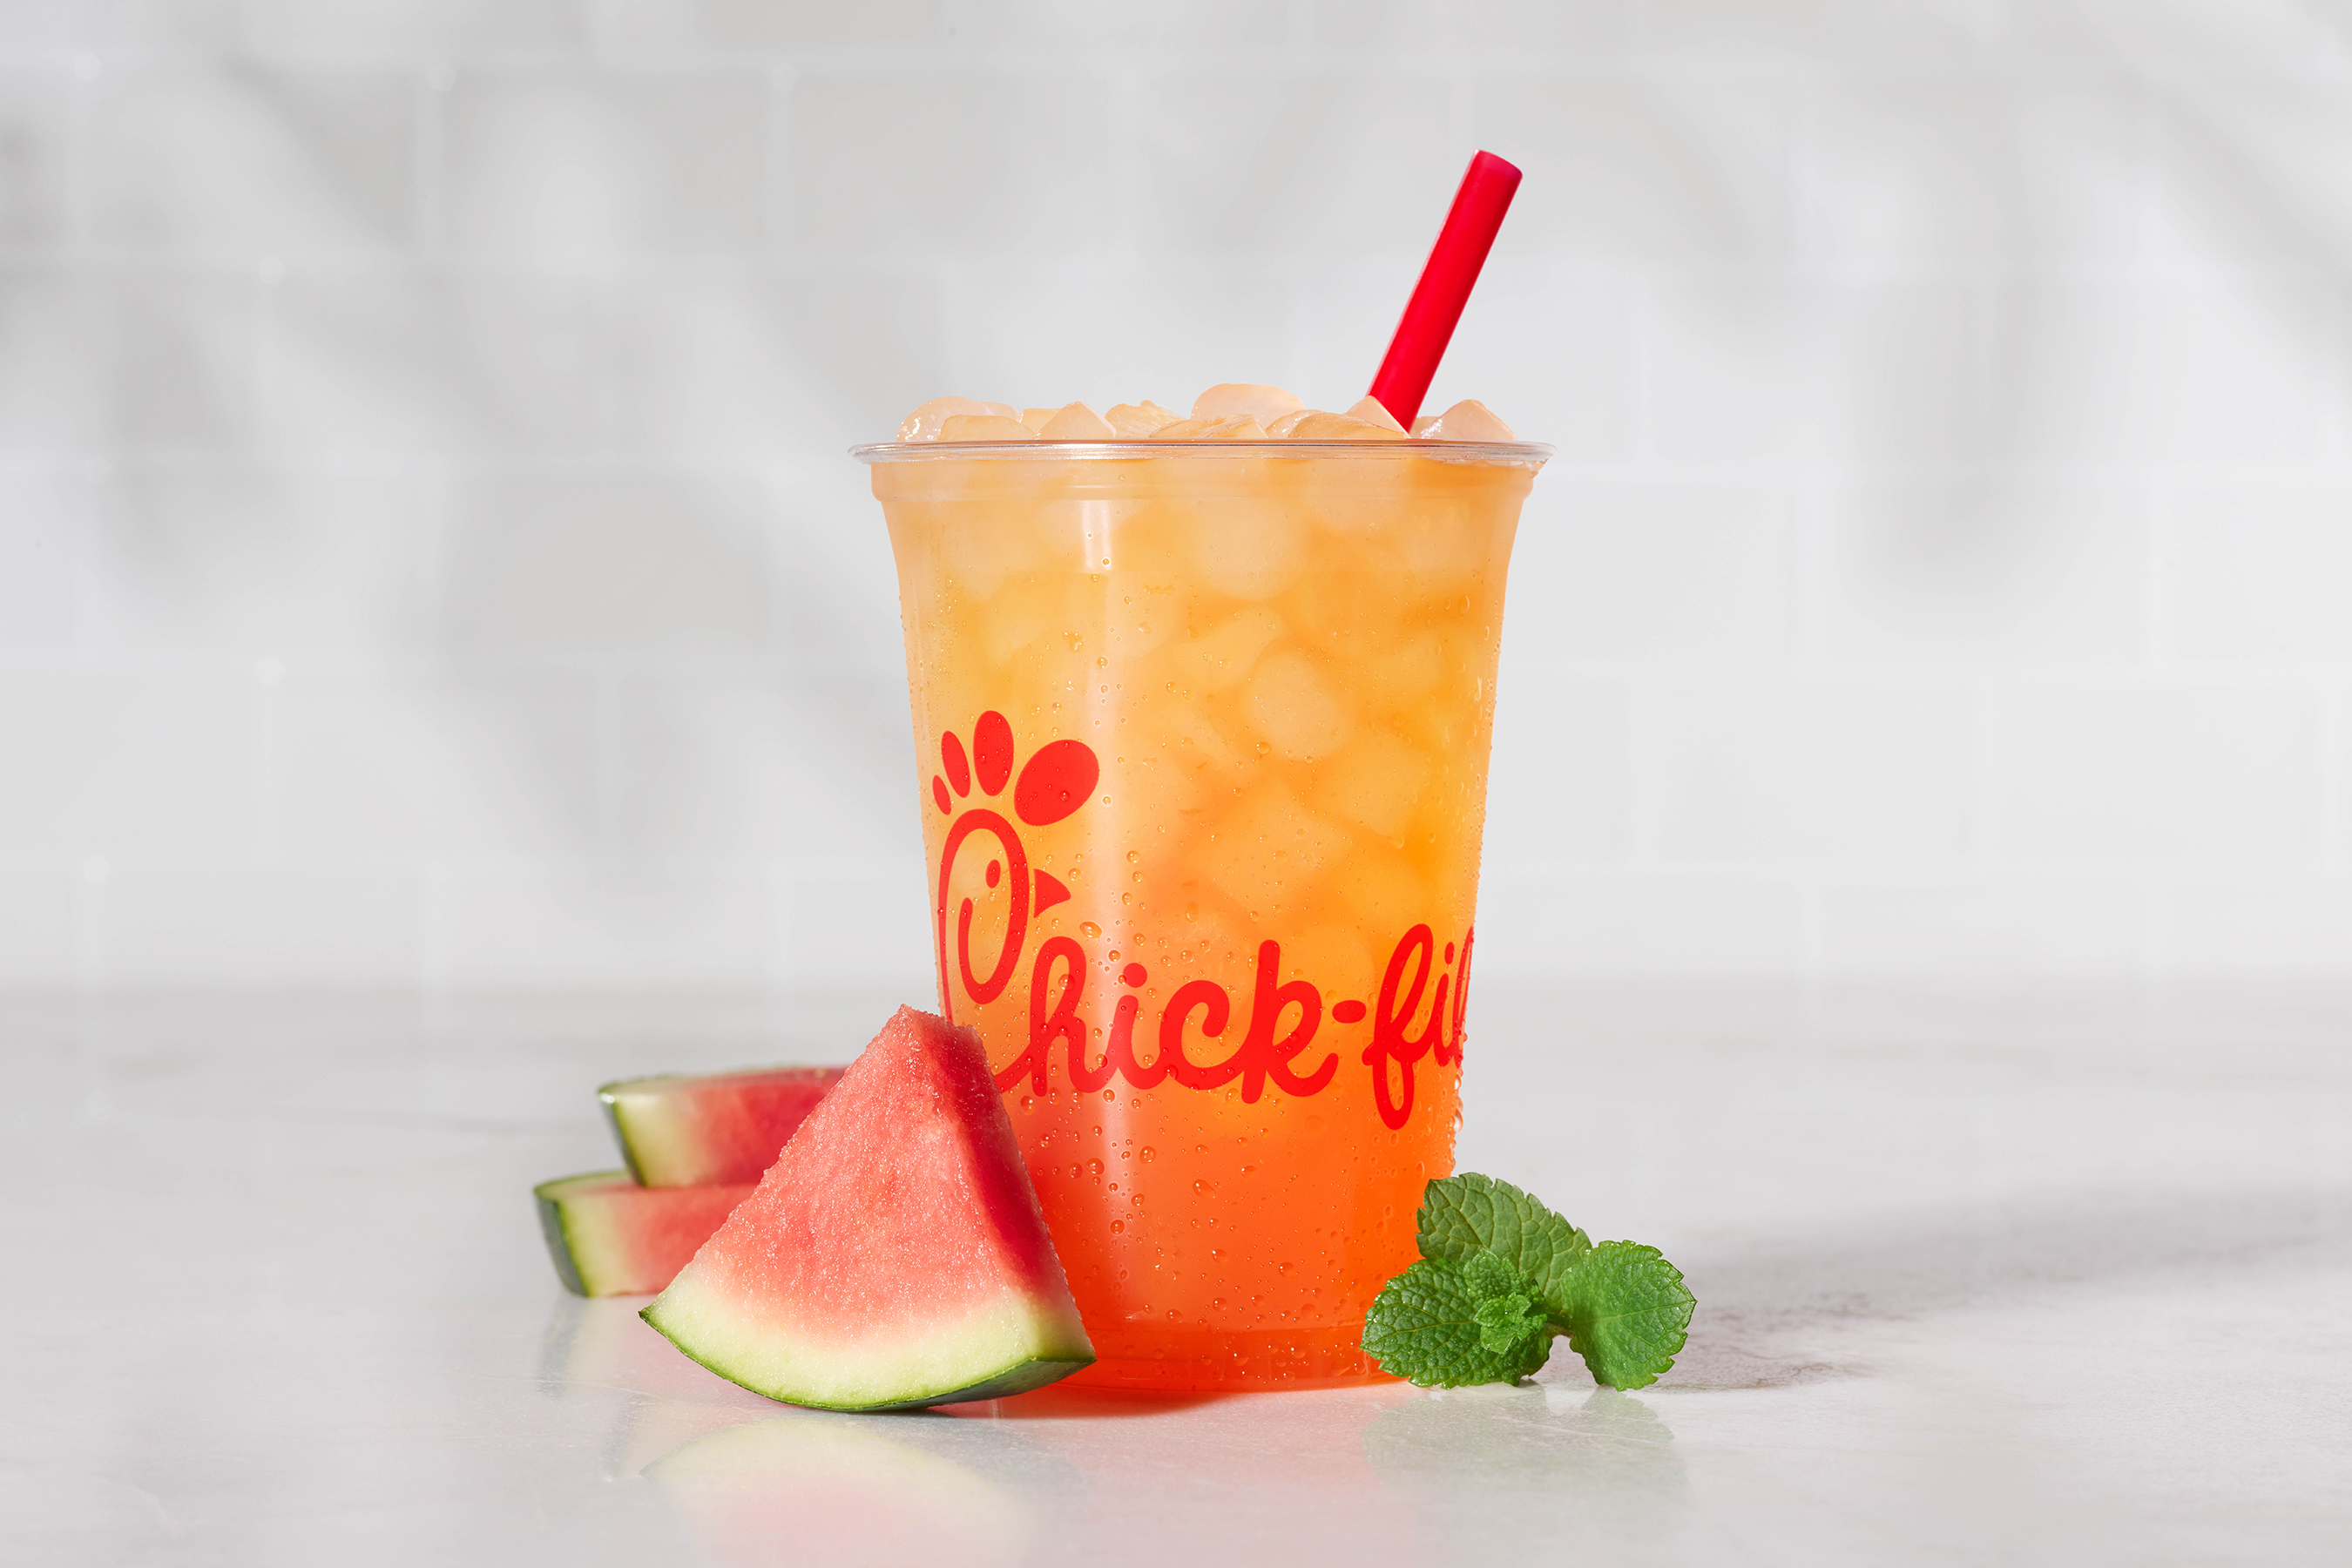 Sunjoy® meets the flavors of watermelon and mint to create a refreshing twist on a classic Chick-fil-A beverage.